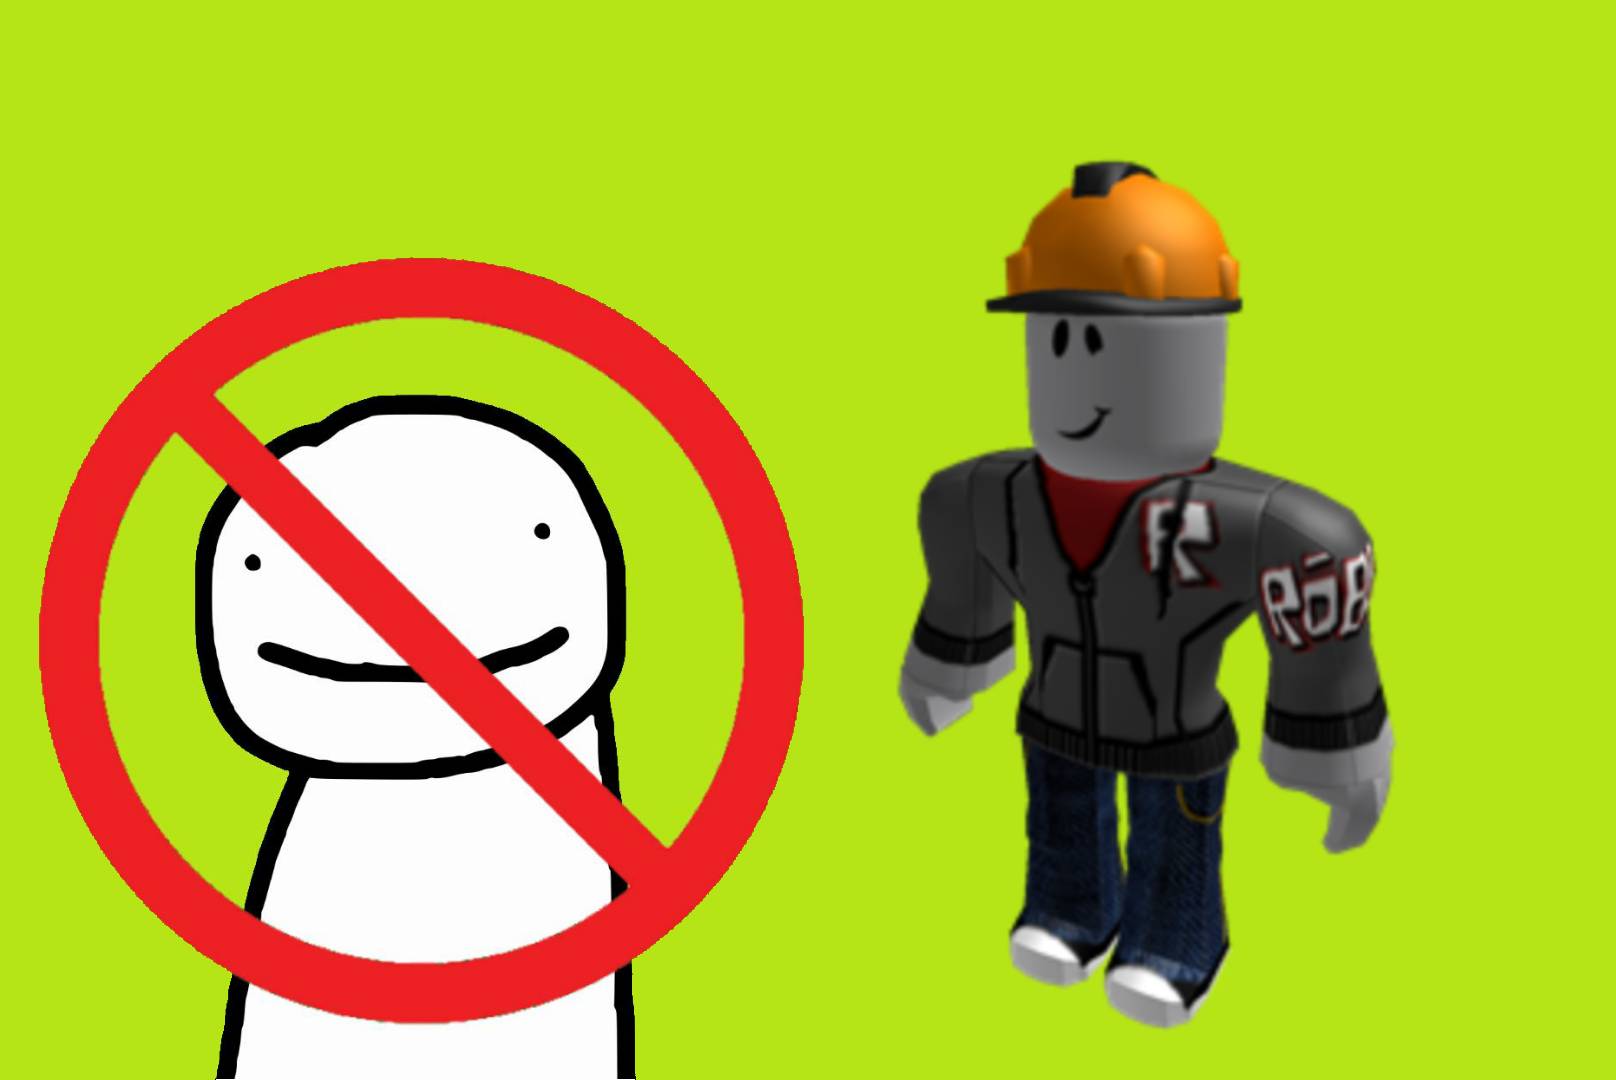 moved on X: builderman 🔨 im learning hands n feet 👍 #roblox